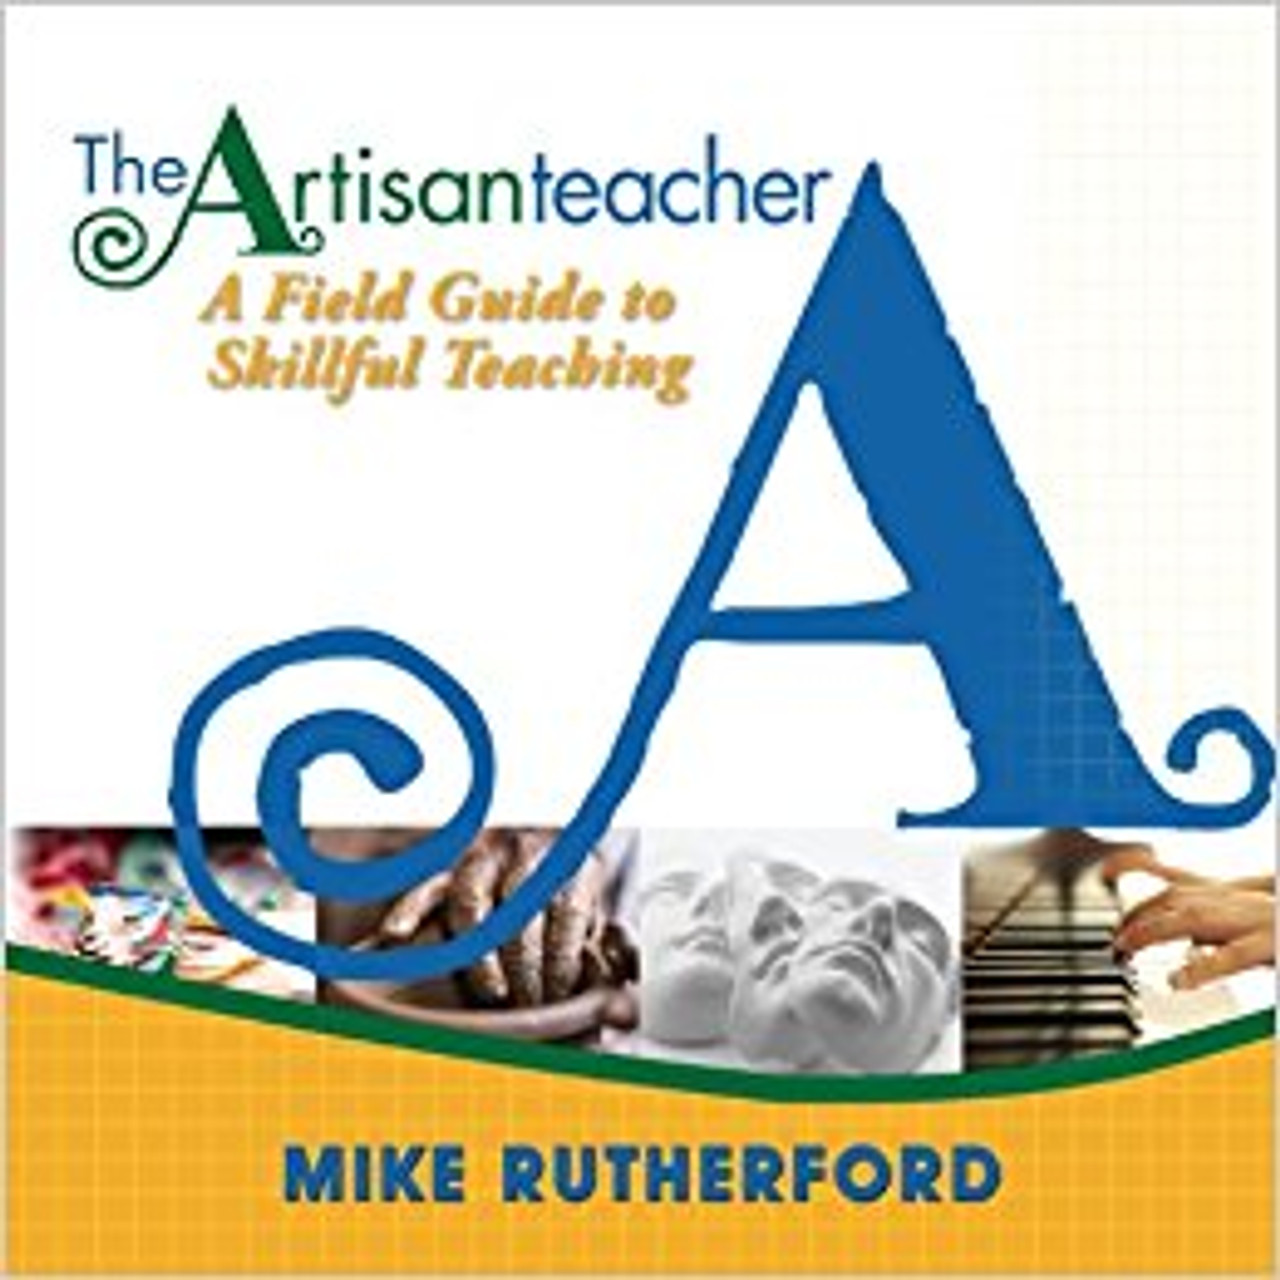 The Artisan Teacher: A Field Guide to Skillful Teaching by Mike Rutherford